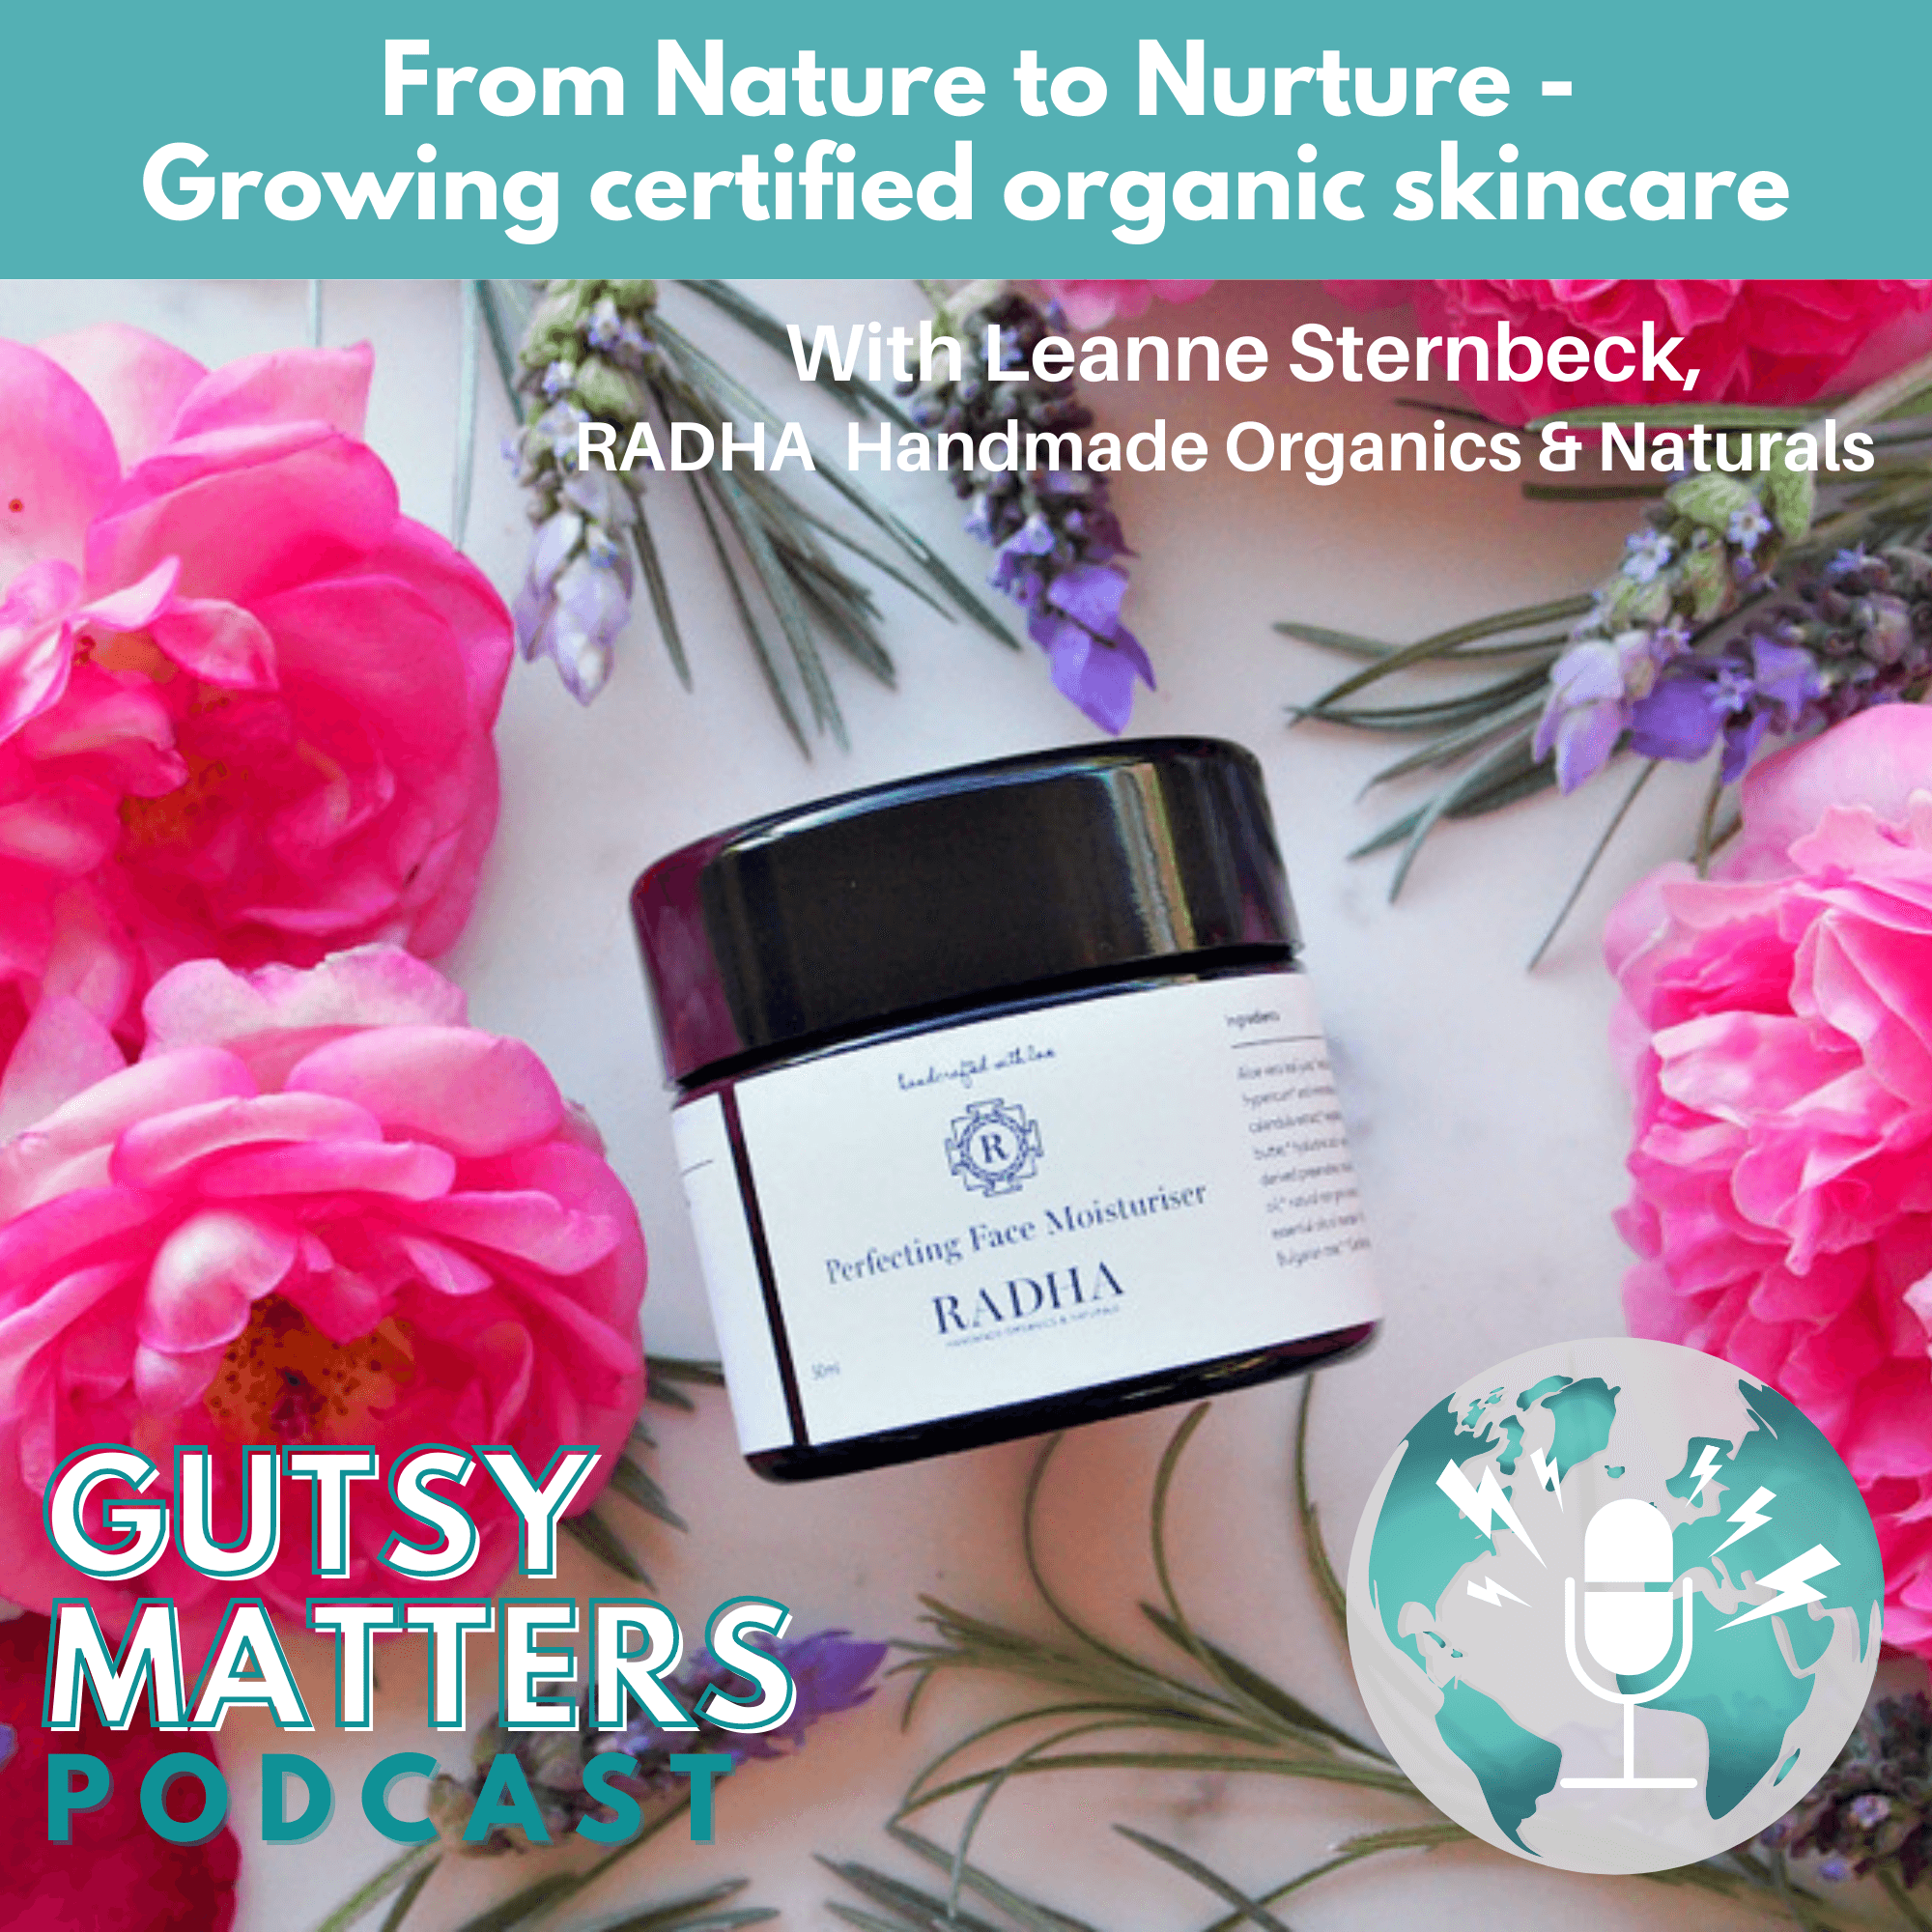 From Nature to Nurture - Growing Certified Organic Skincare